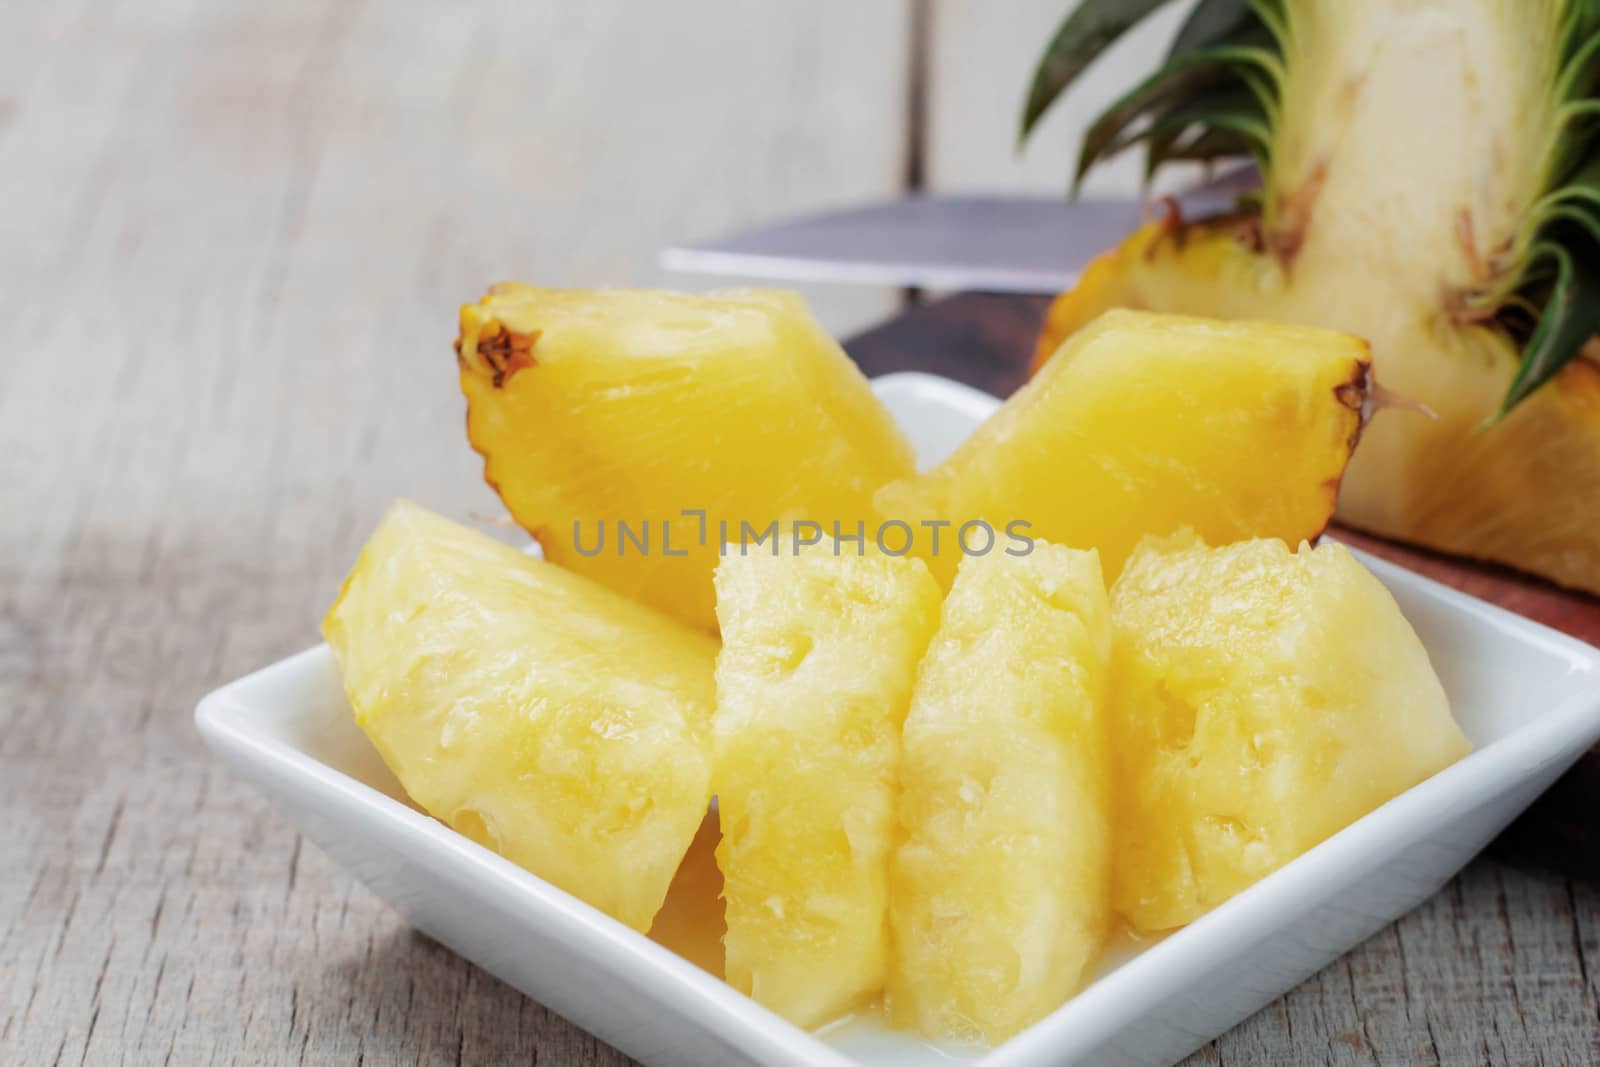 Pineapple sliced ​​on a plate of wooden table.